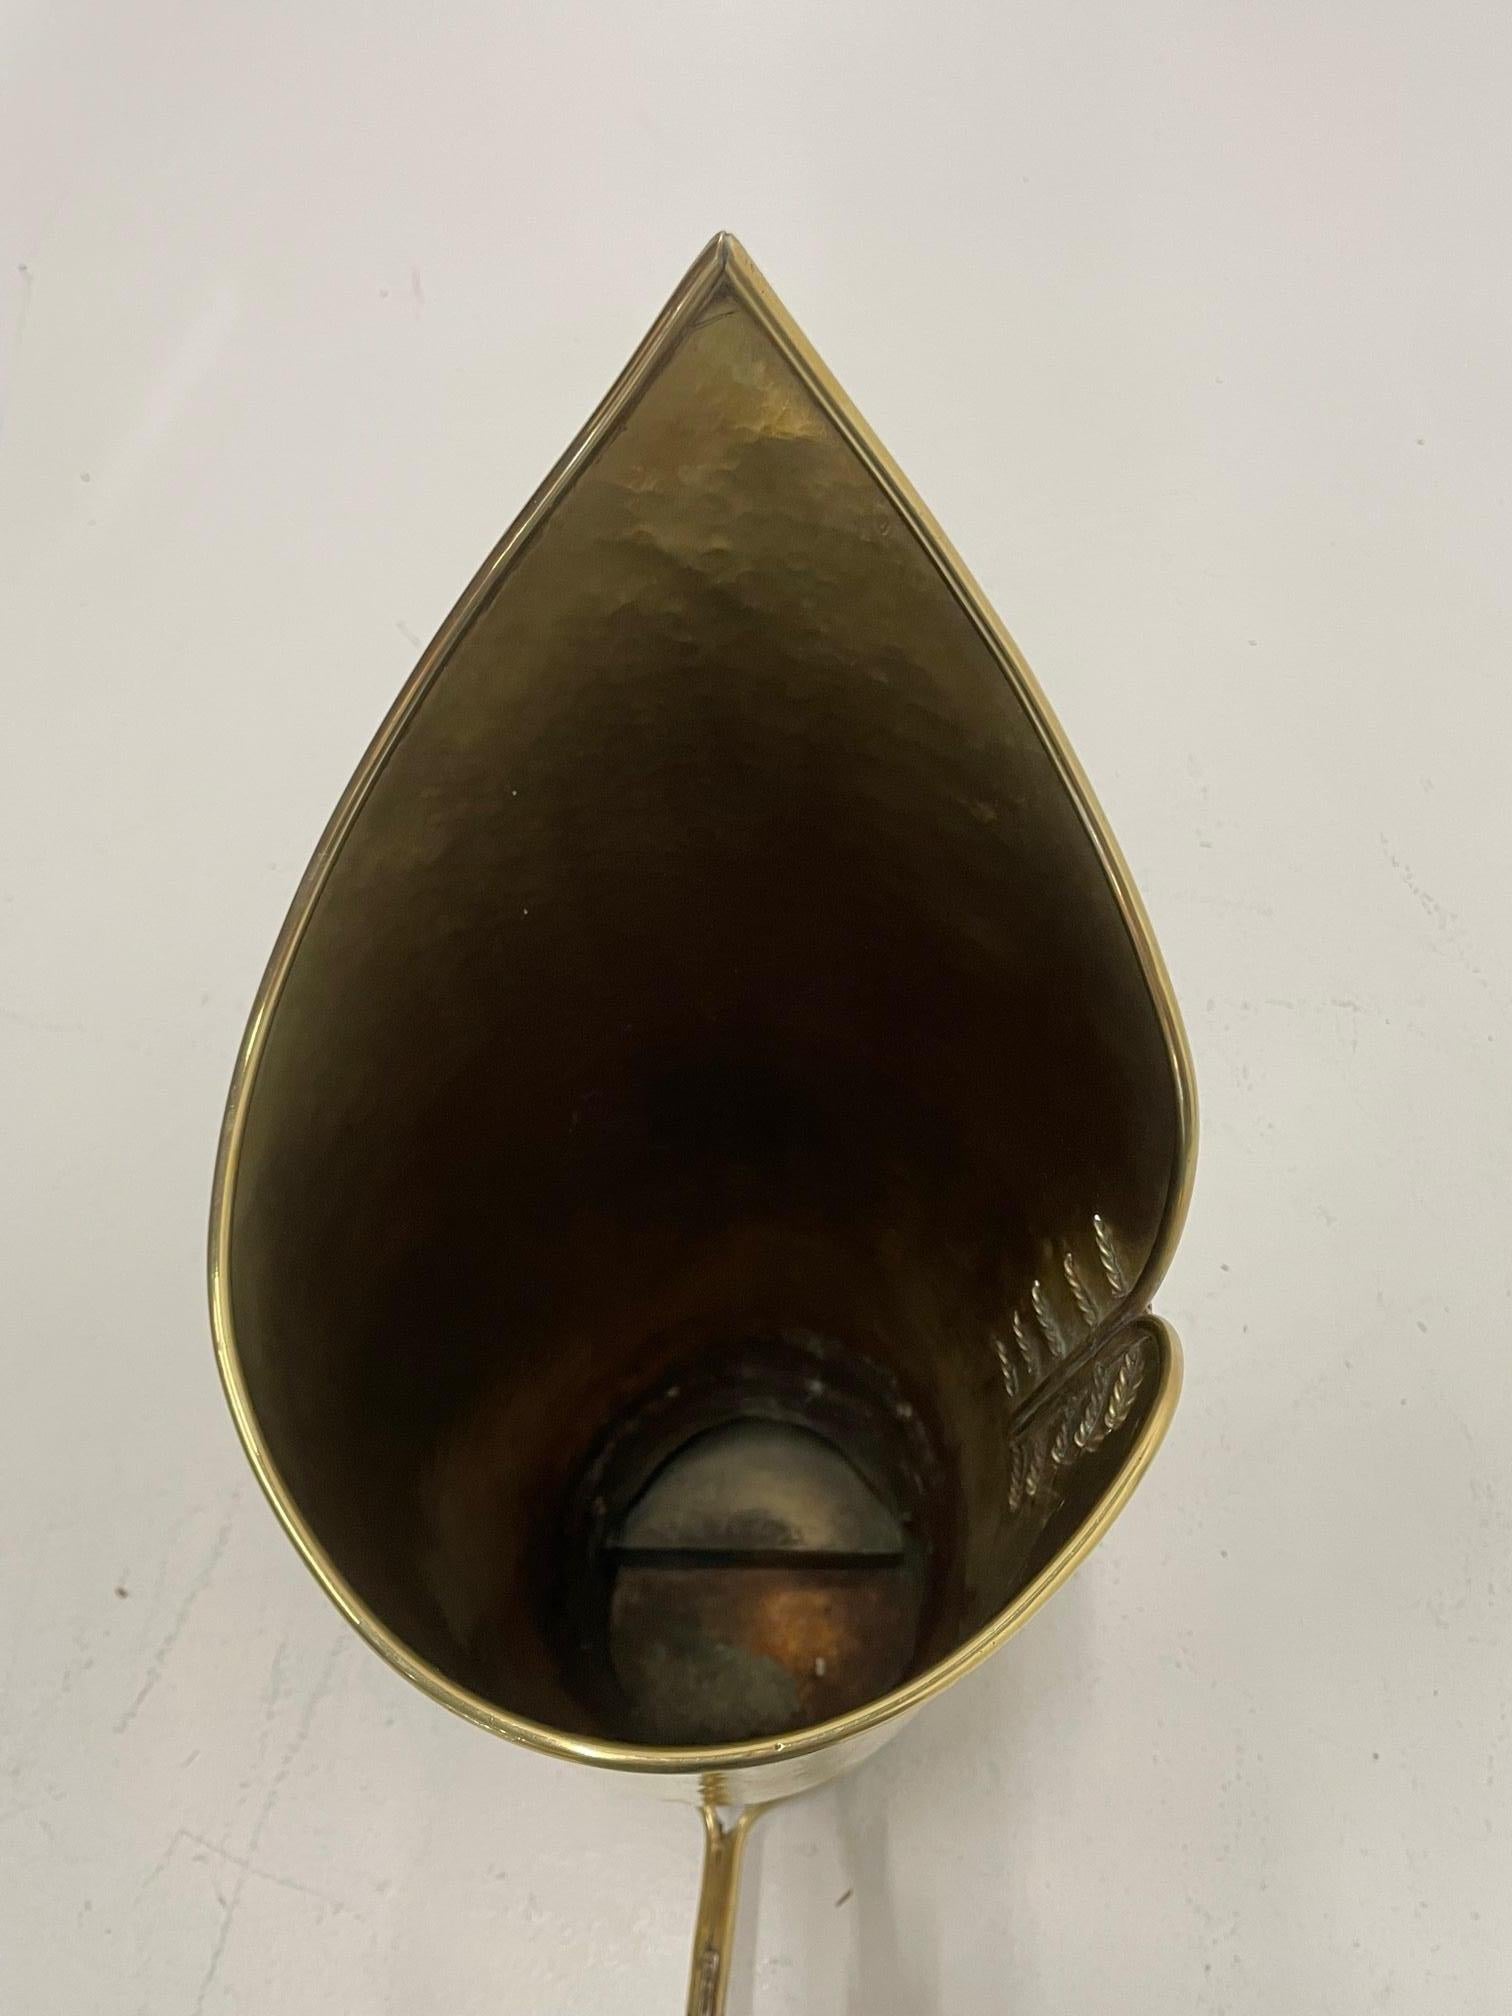 Marvelous Antique Polished Brass Boot Shaped Umbrella Stand For Sale 5